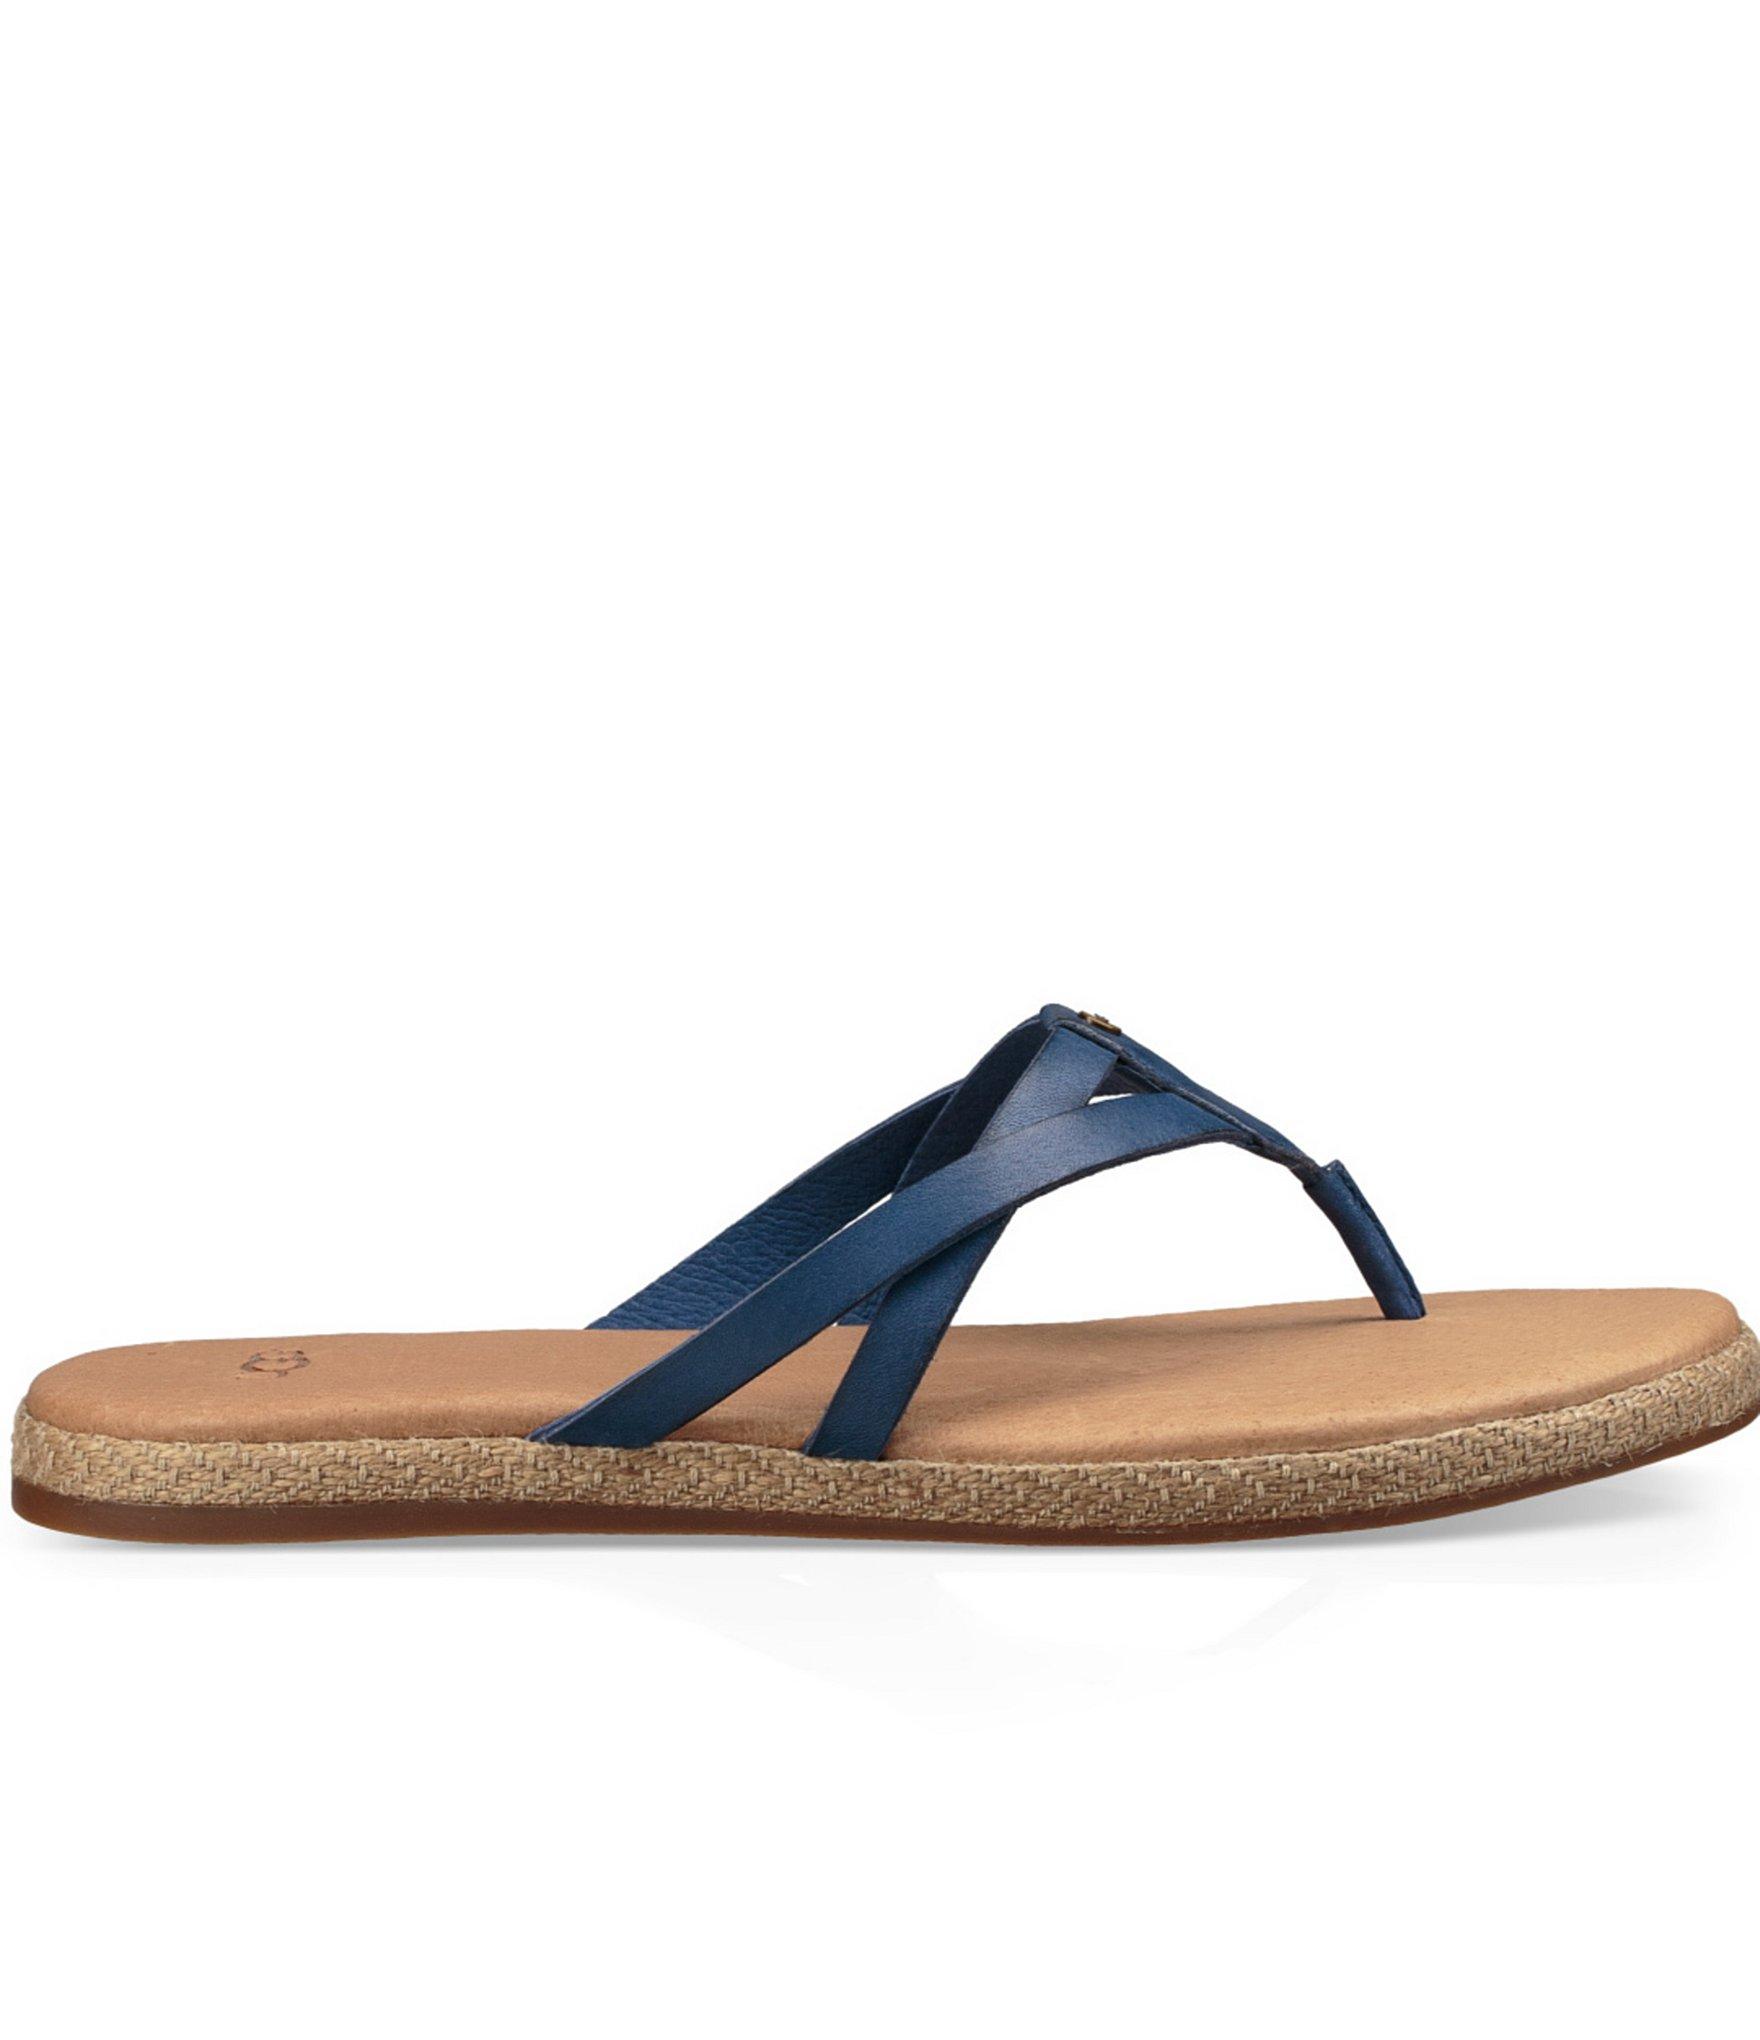 Lyst - UGG ® Annice Thong Sandals in Blue